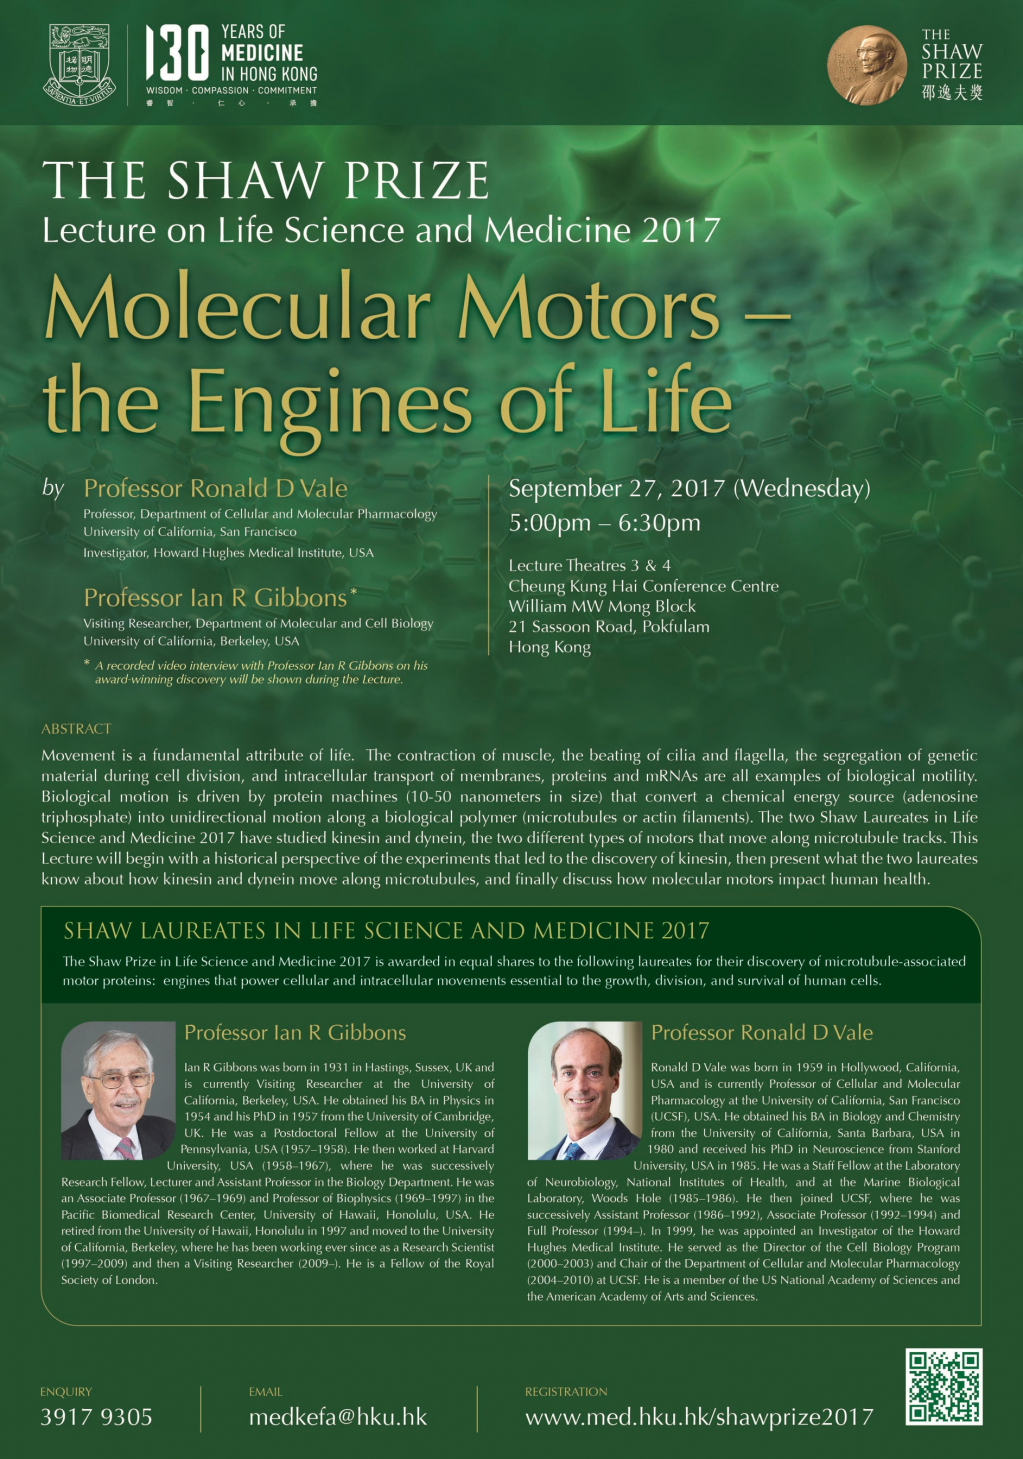 The Shaw Prize Lecture on Life Science and Medicine by Professor Ian R Gibbons and Professor Ronald D Vale